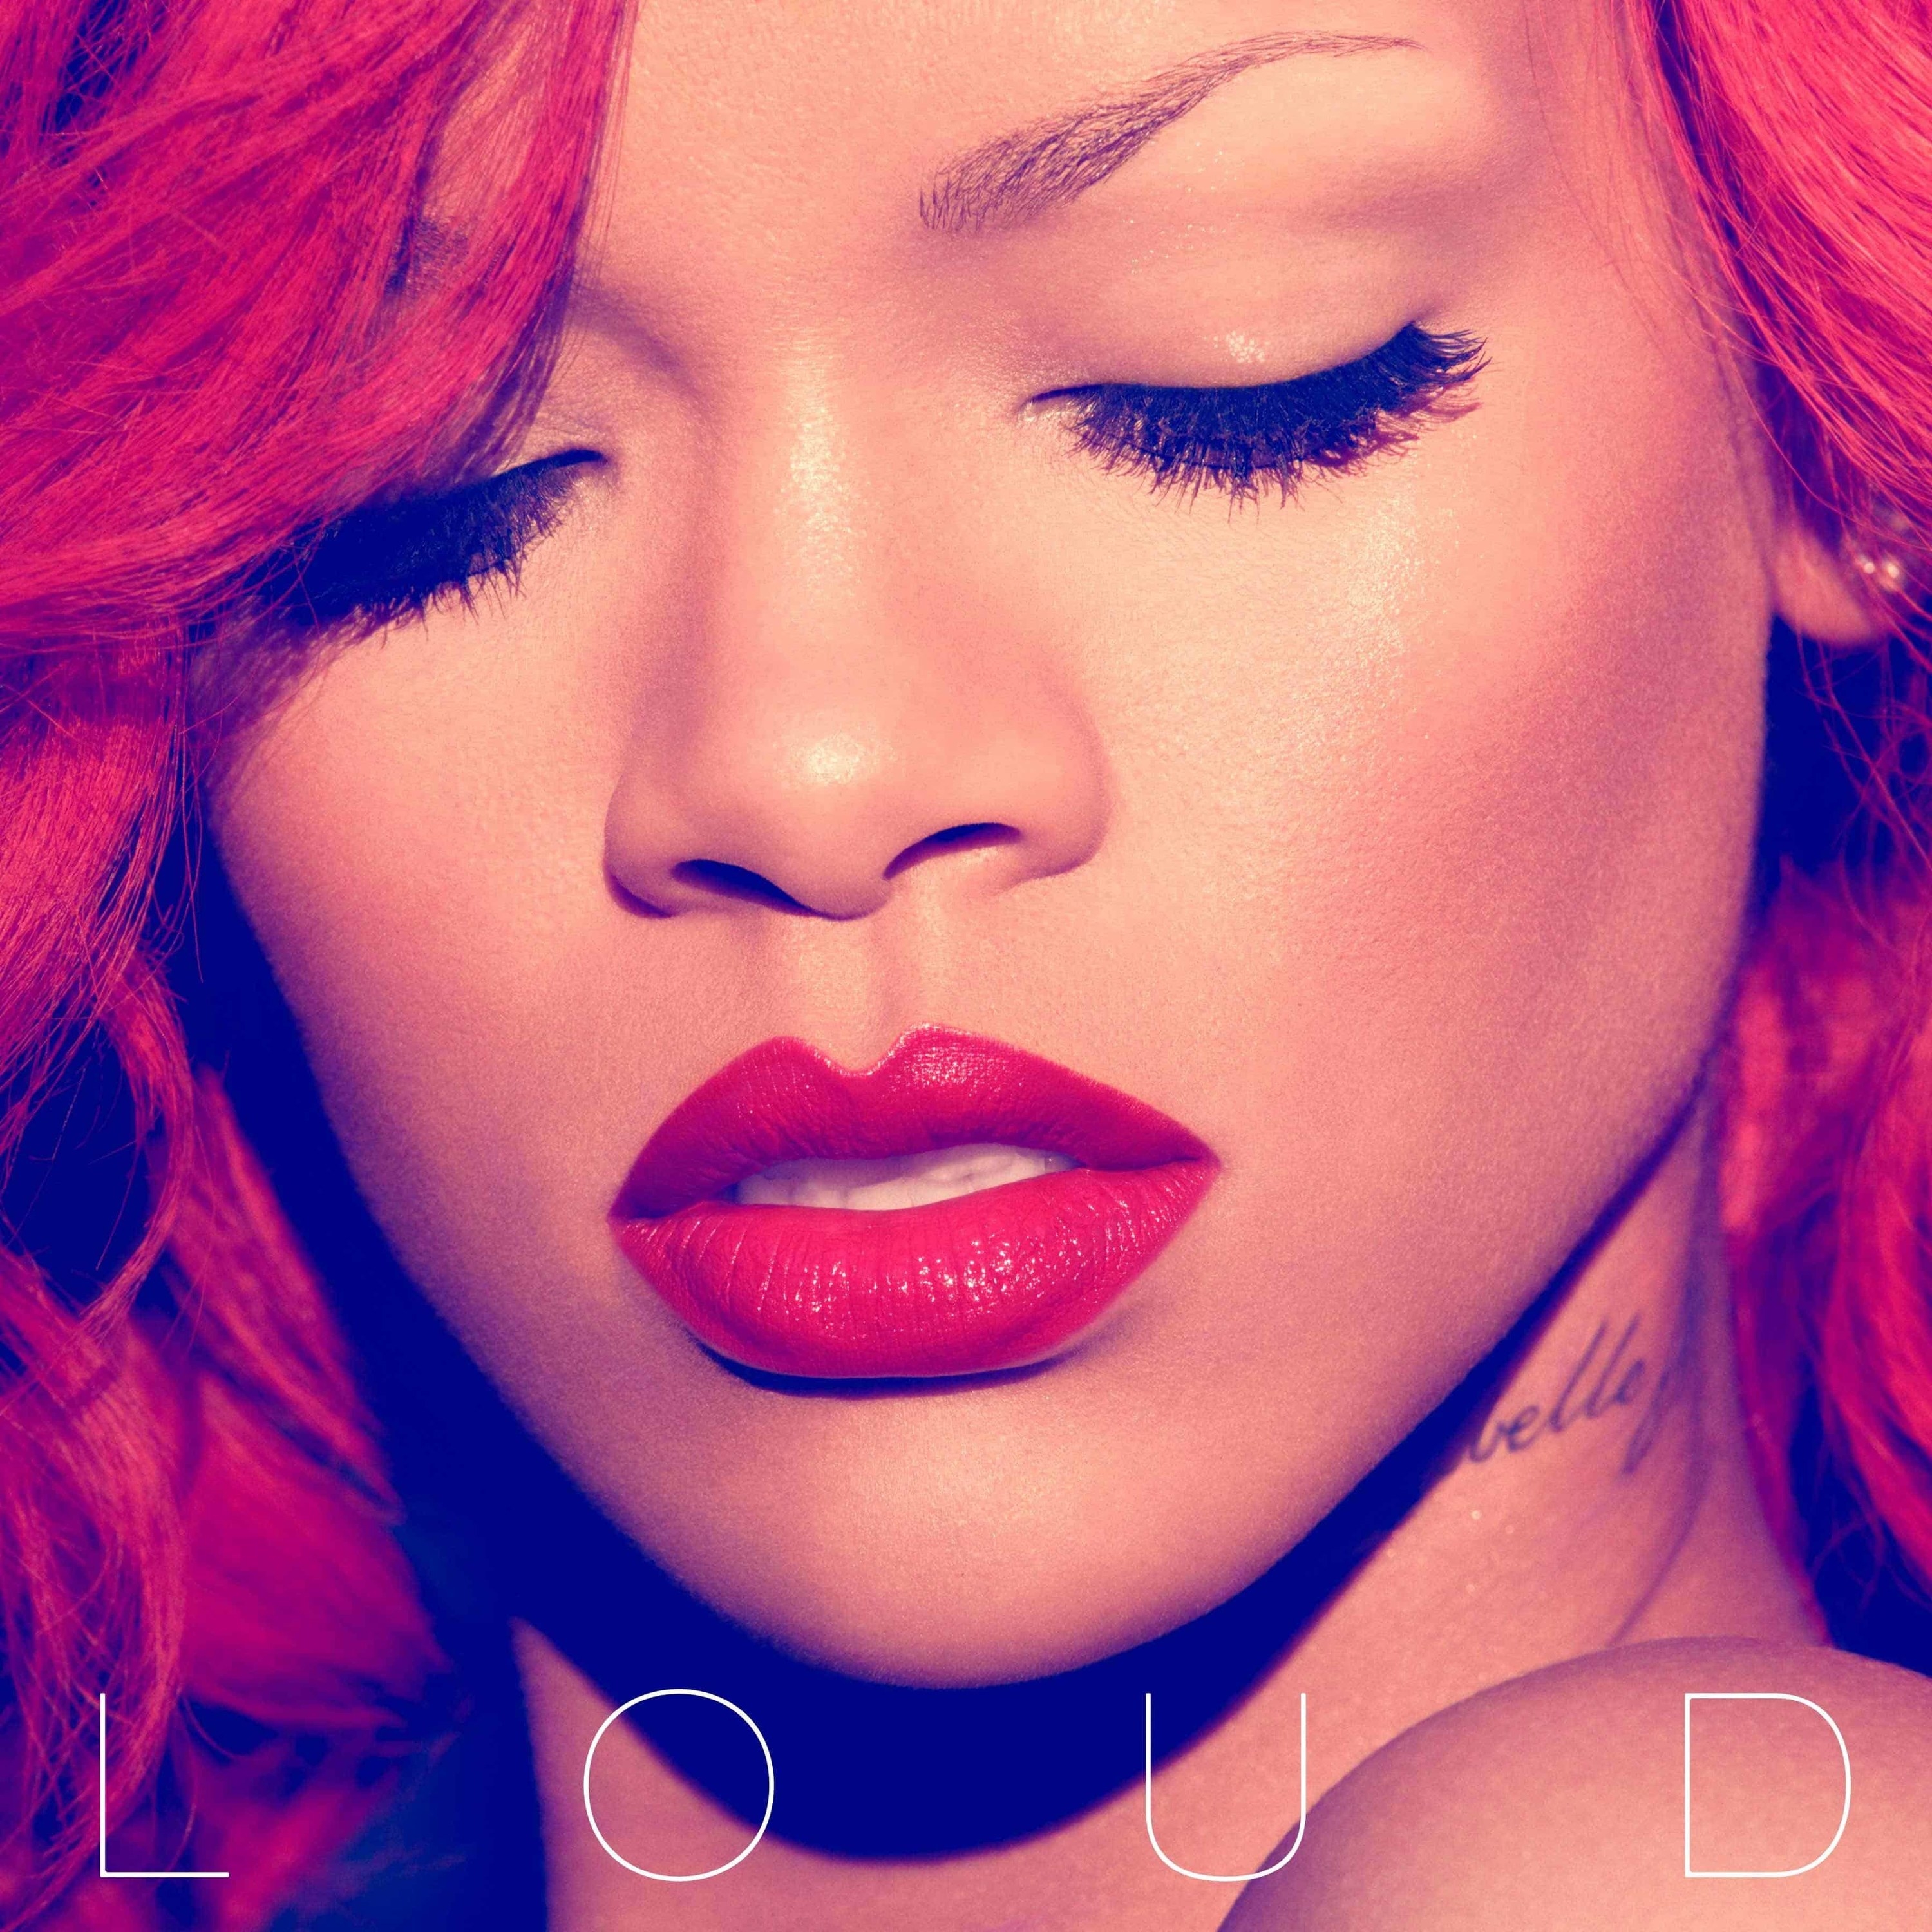 Cover of Loud with Rihanna looking downward wearing bright red lipstick